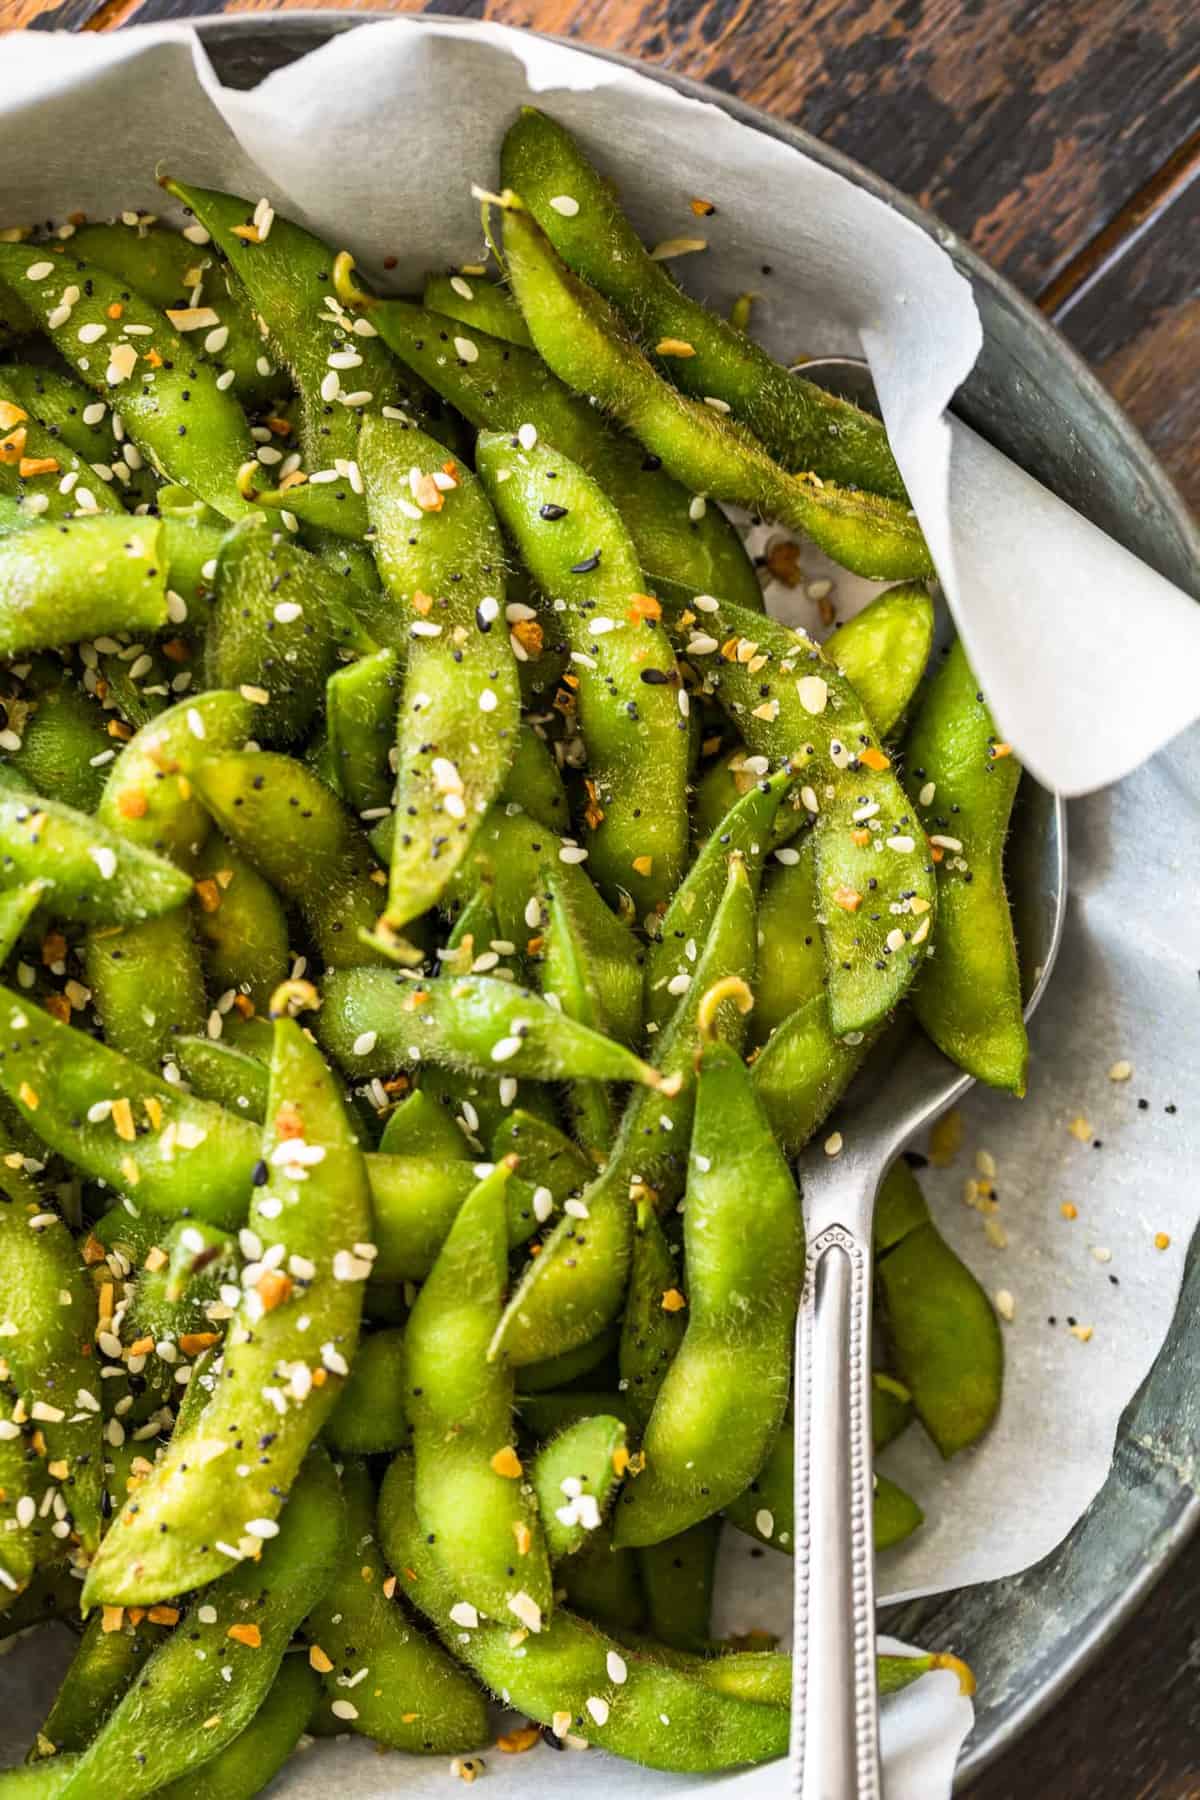 How to Make Edamame in 5 Minutes or Less